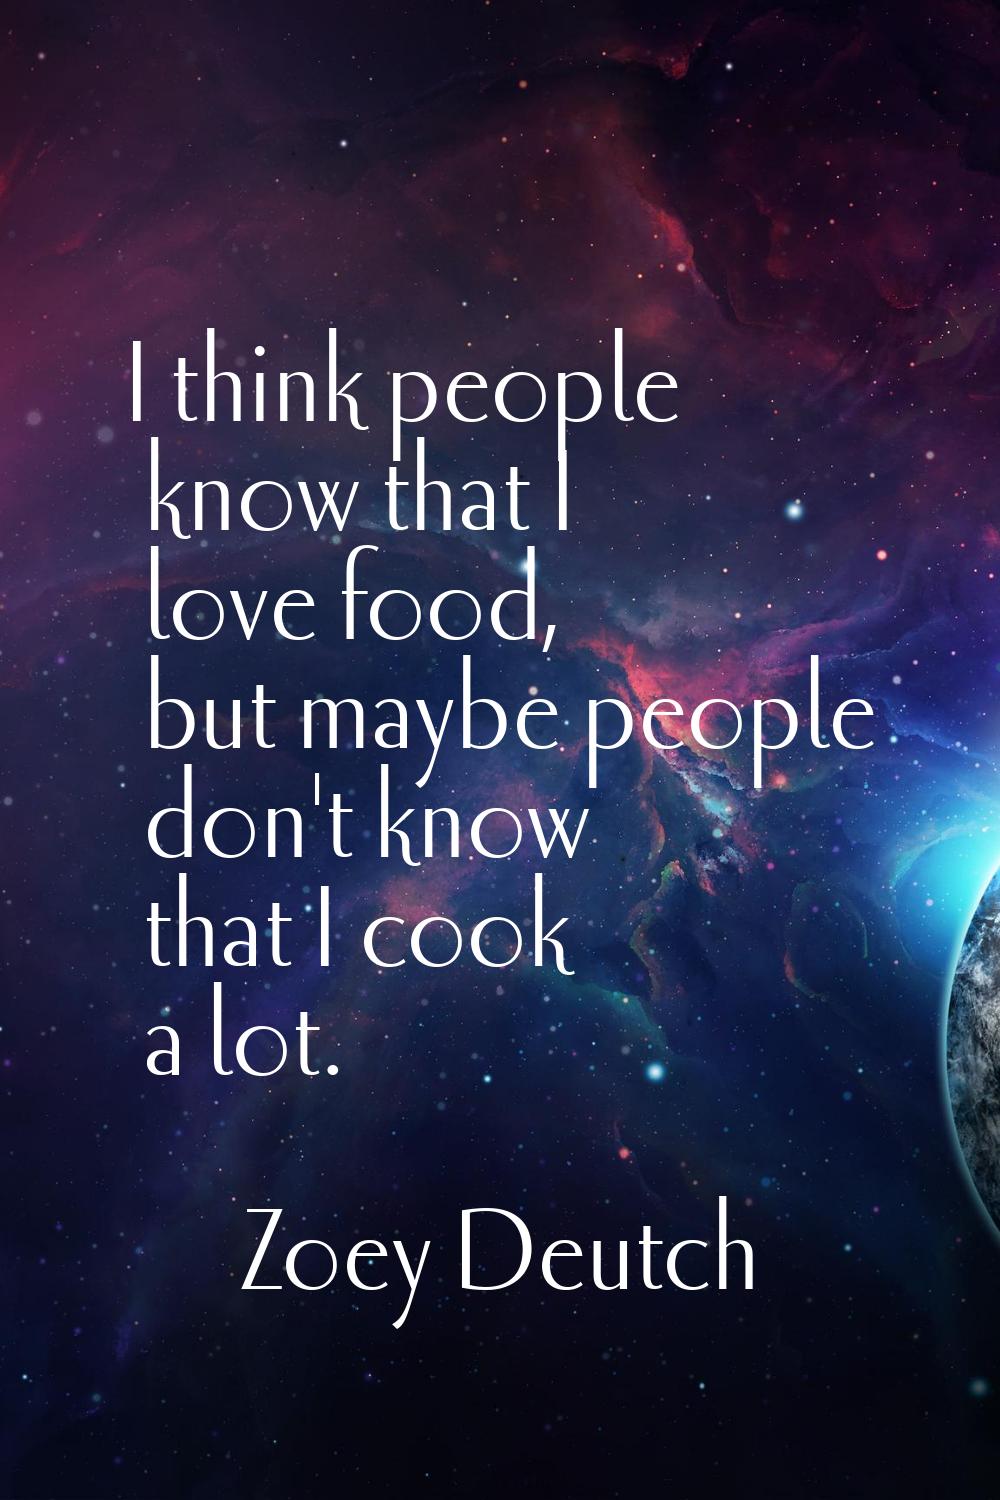 I think people know that I love food, but maybe people don't know that I cook a lot.